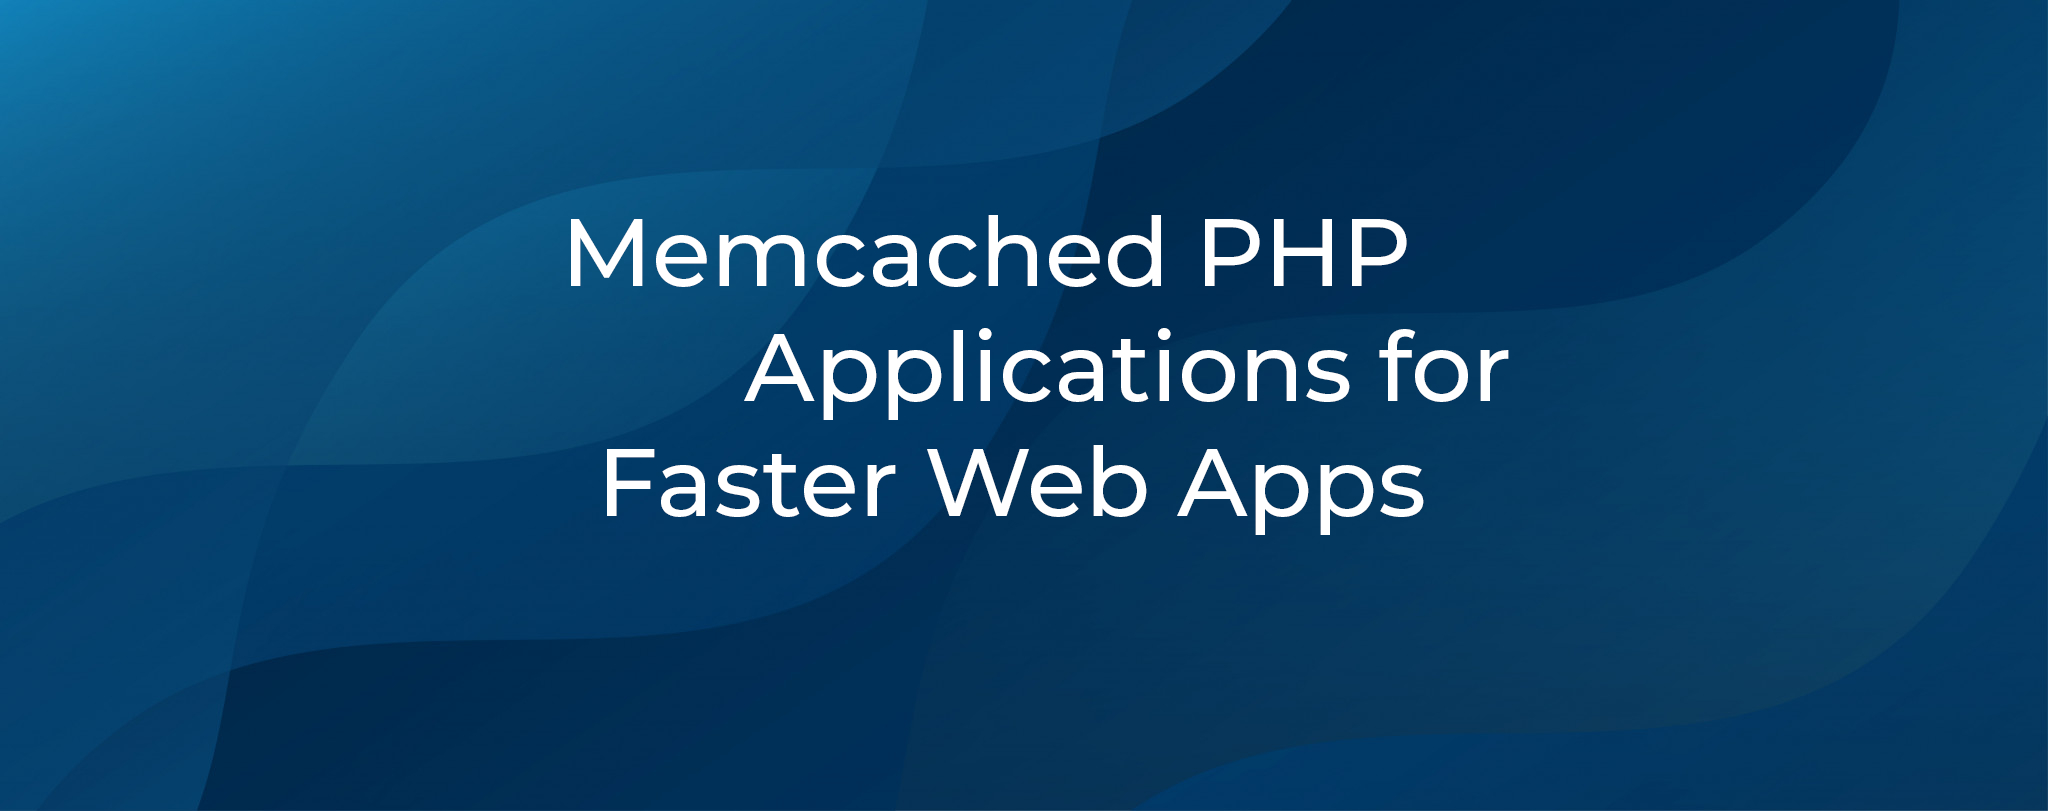 Memcached PHP Applications for Faster Web Apps